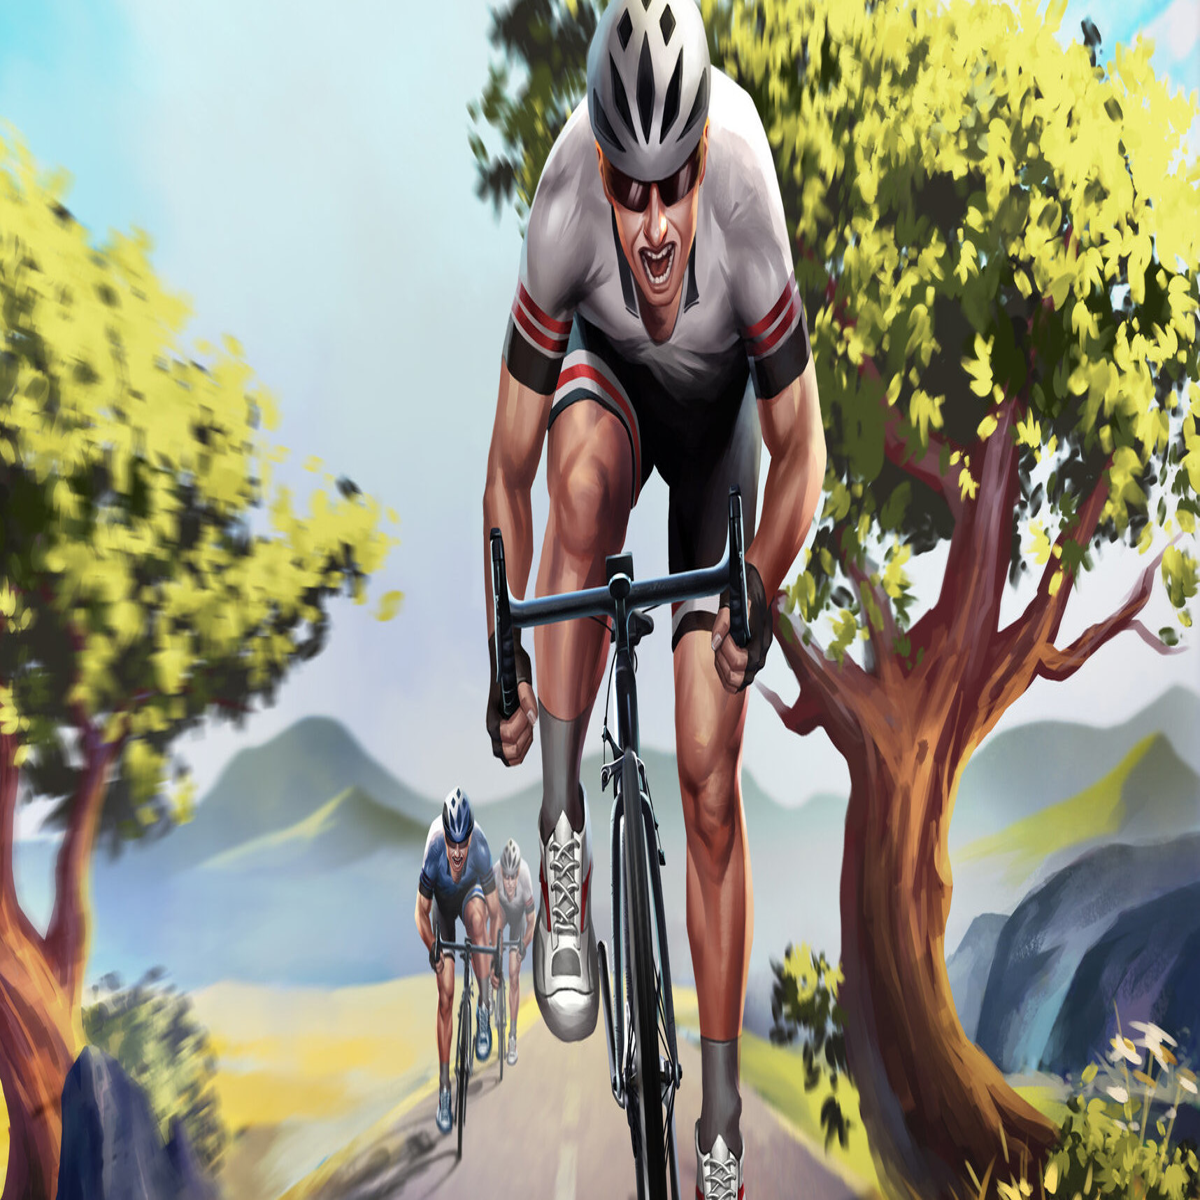 Buy Pro Cycling Manager 2020 Steam Key cheaper! Enjoy